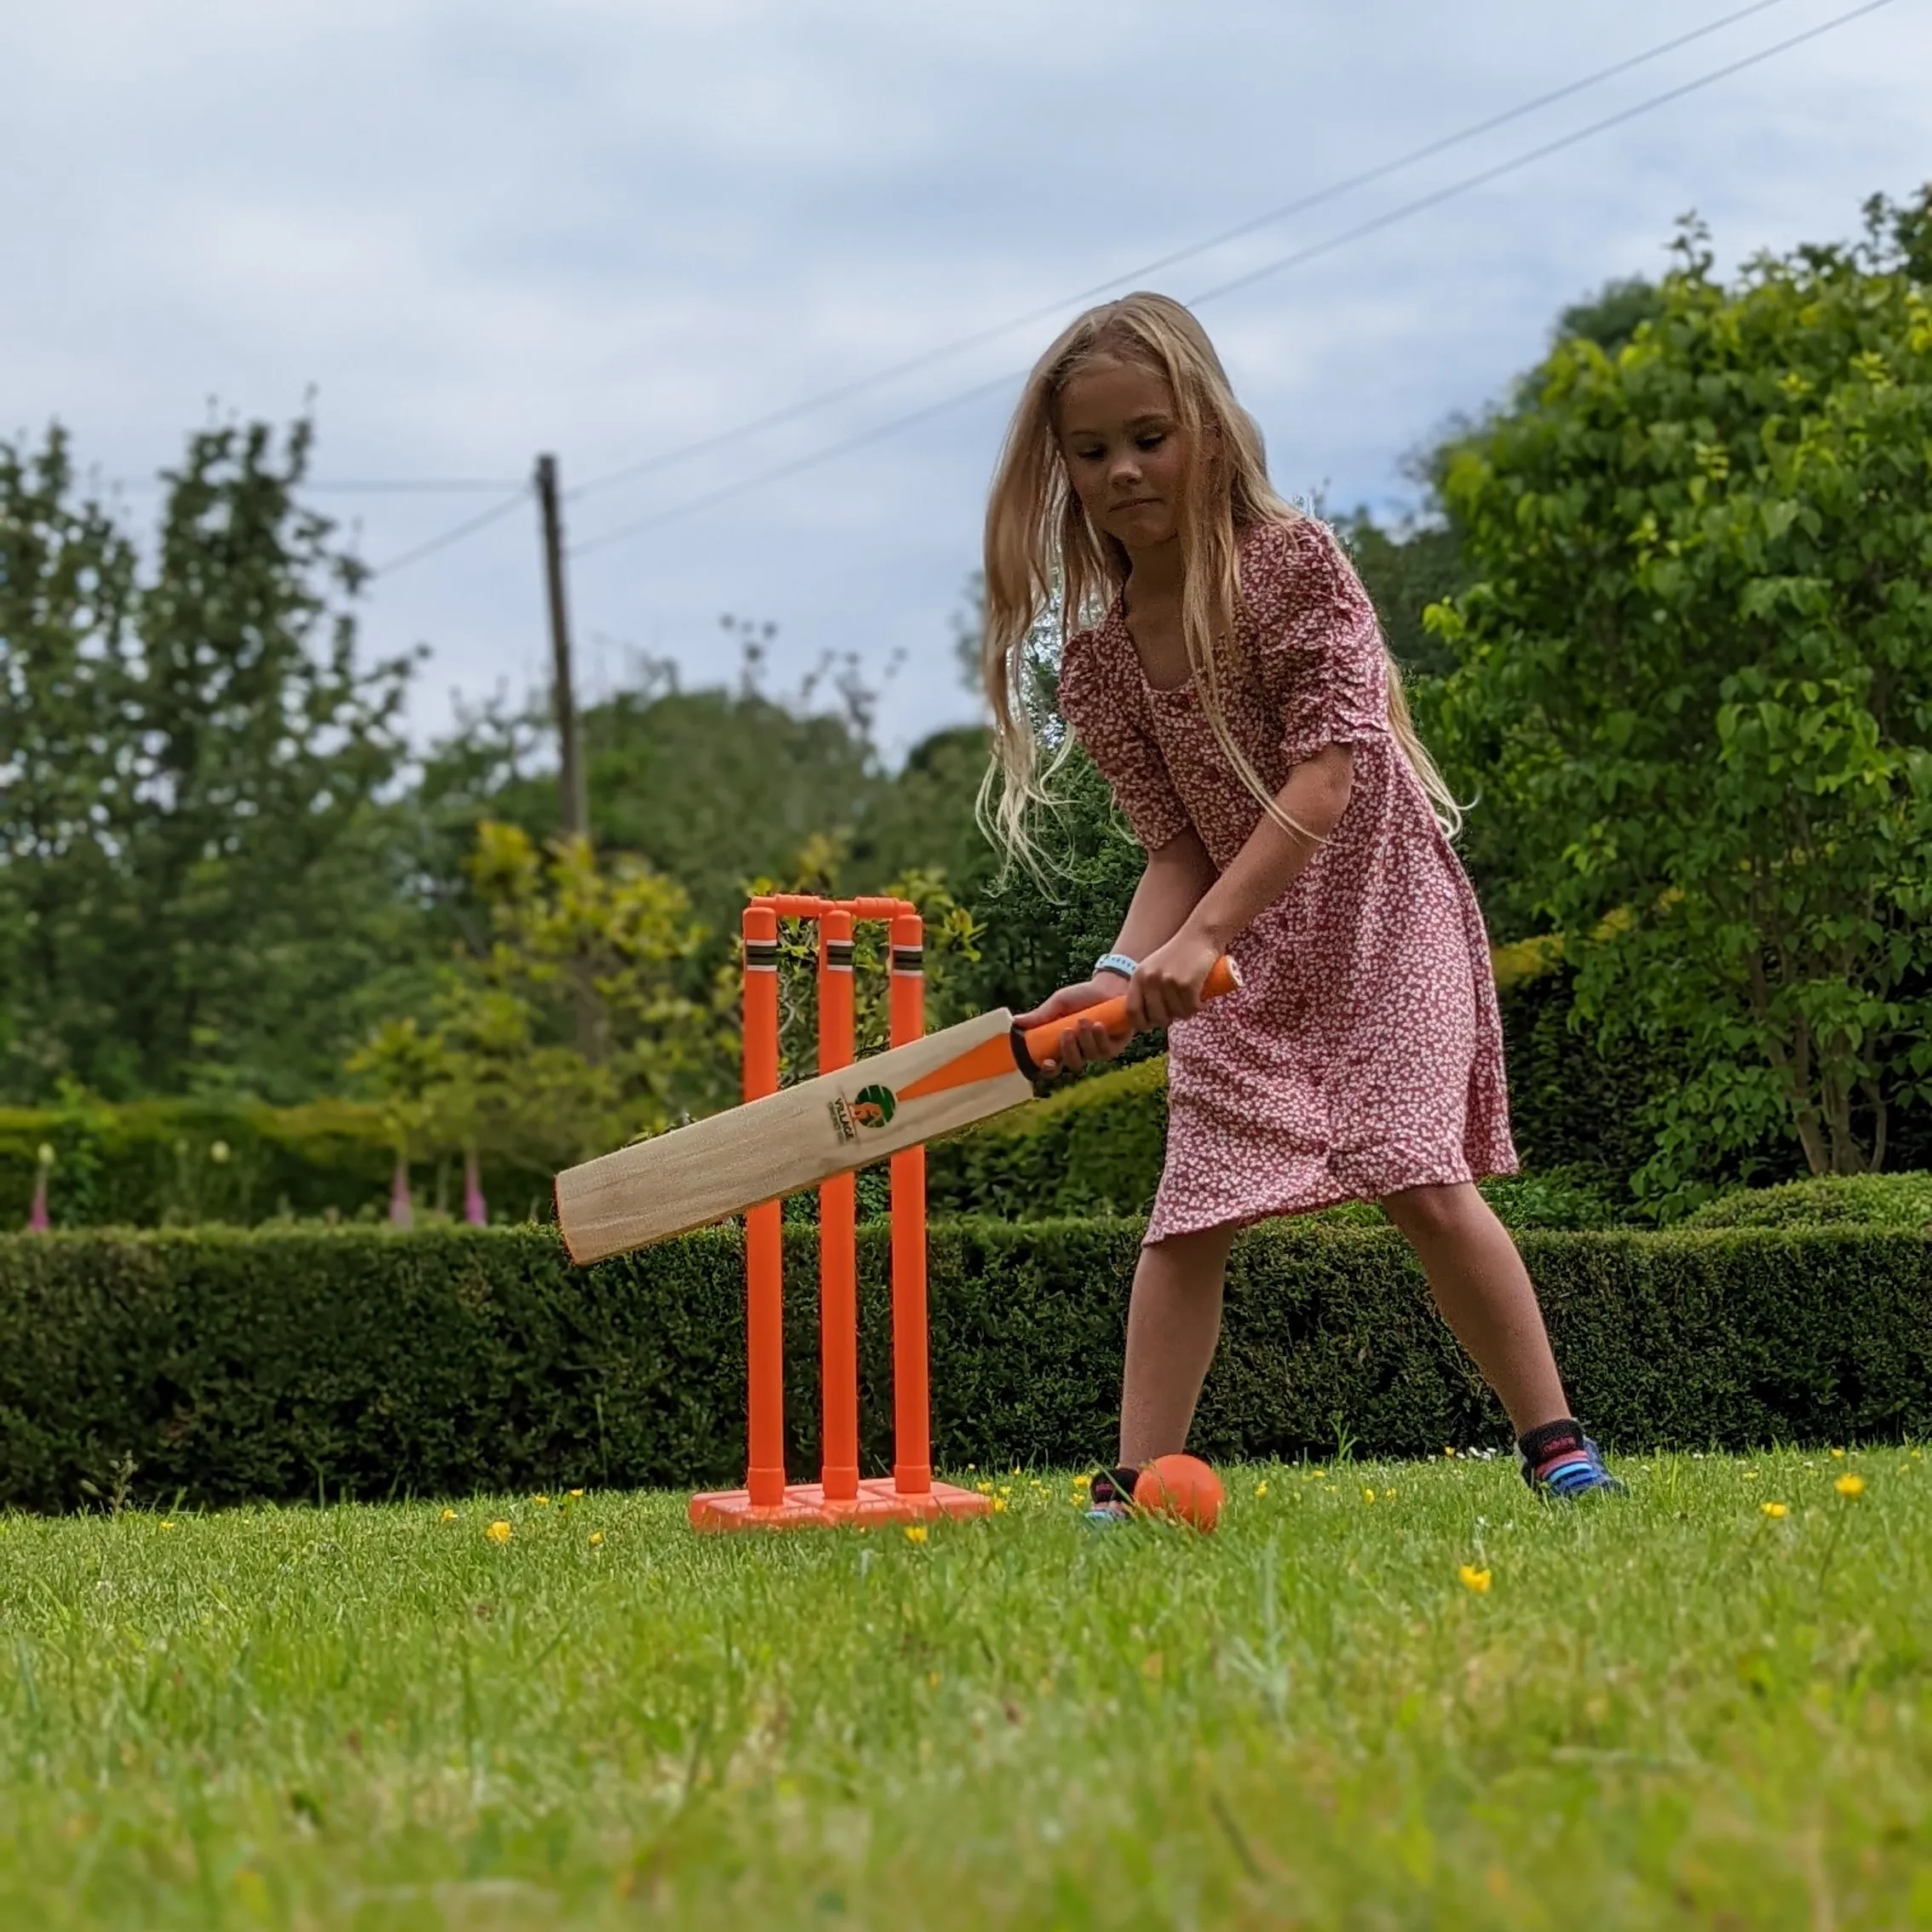 Our cheap kids cricket bat in action